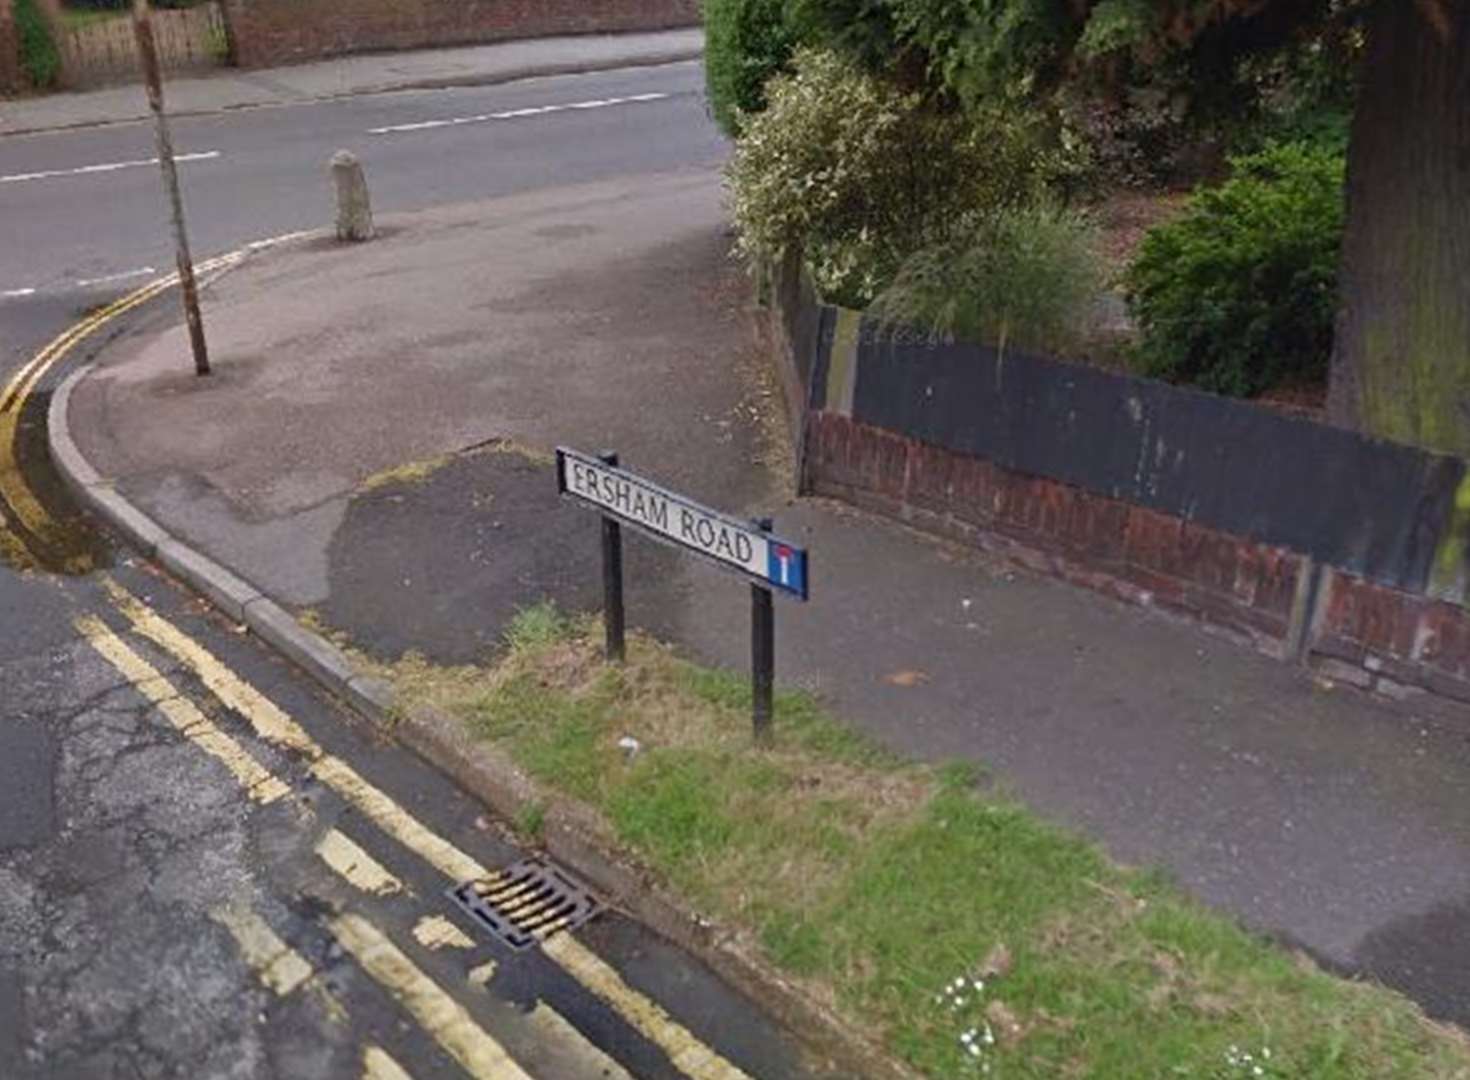 Police called to house after body discovered